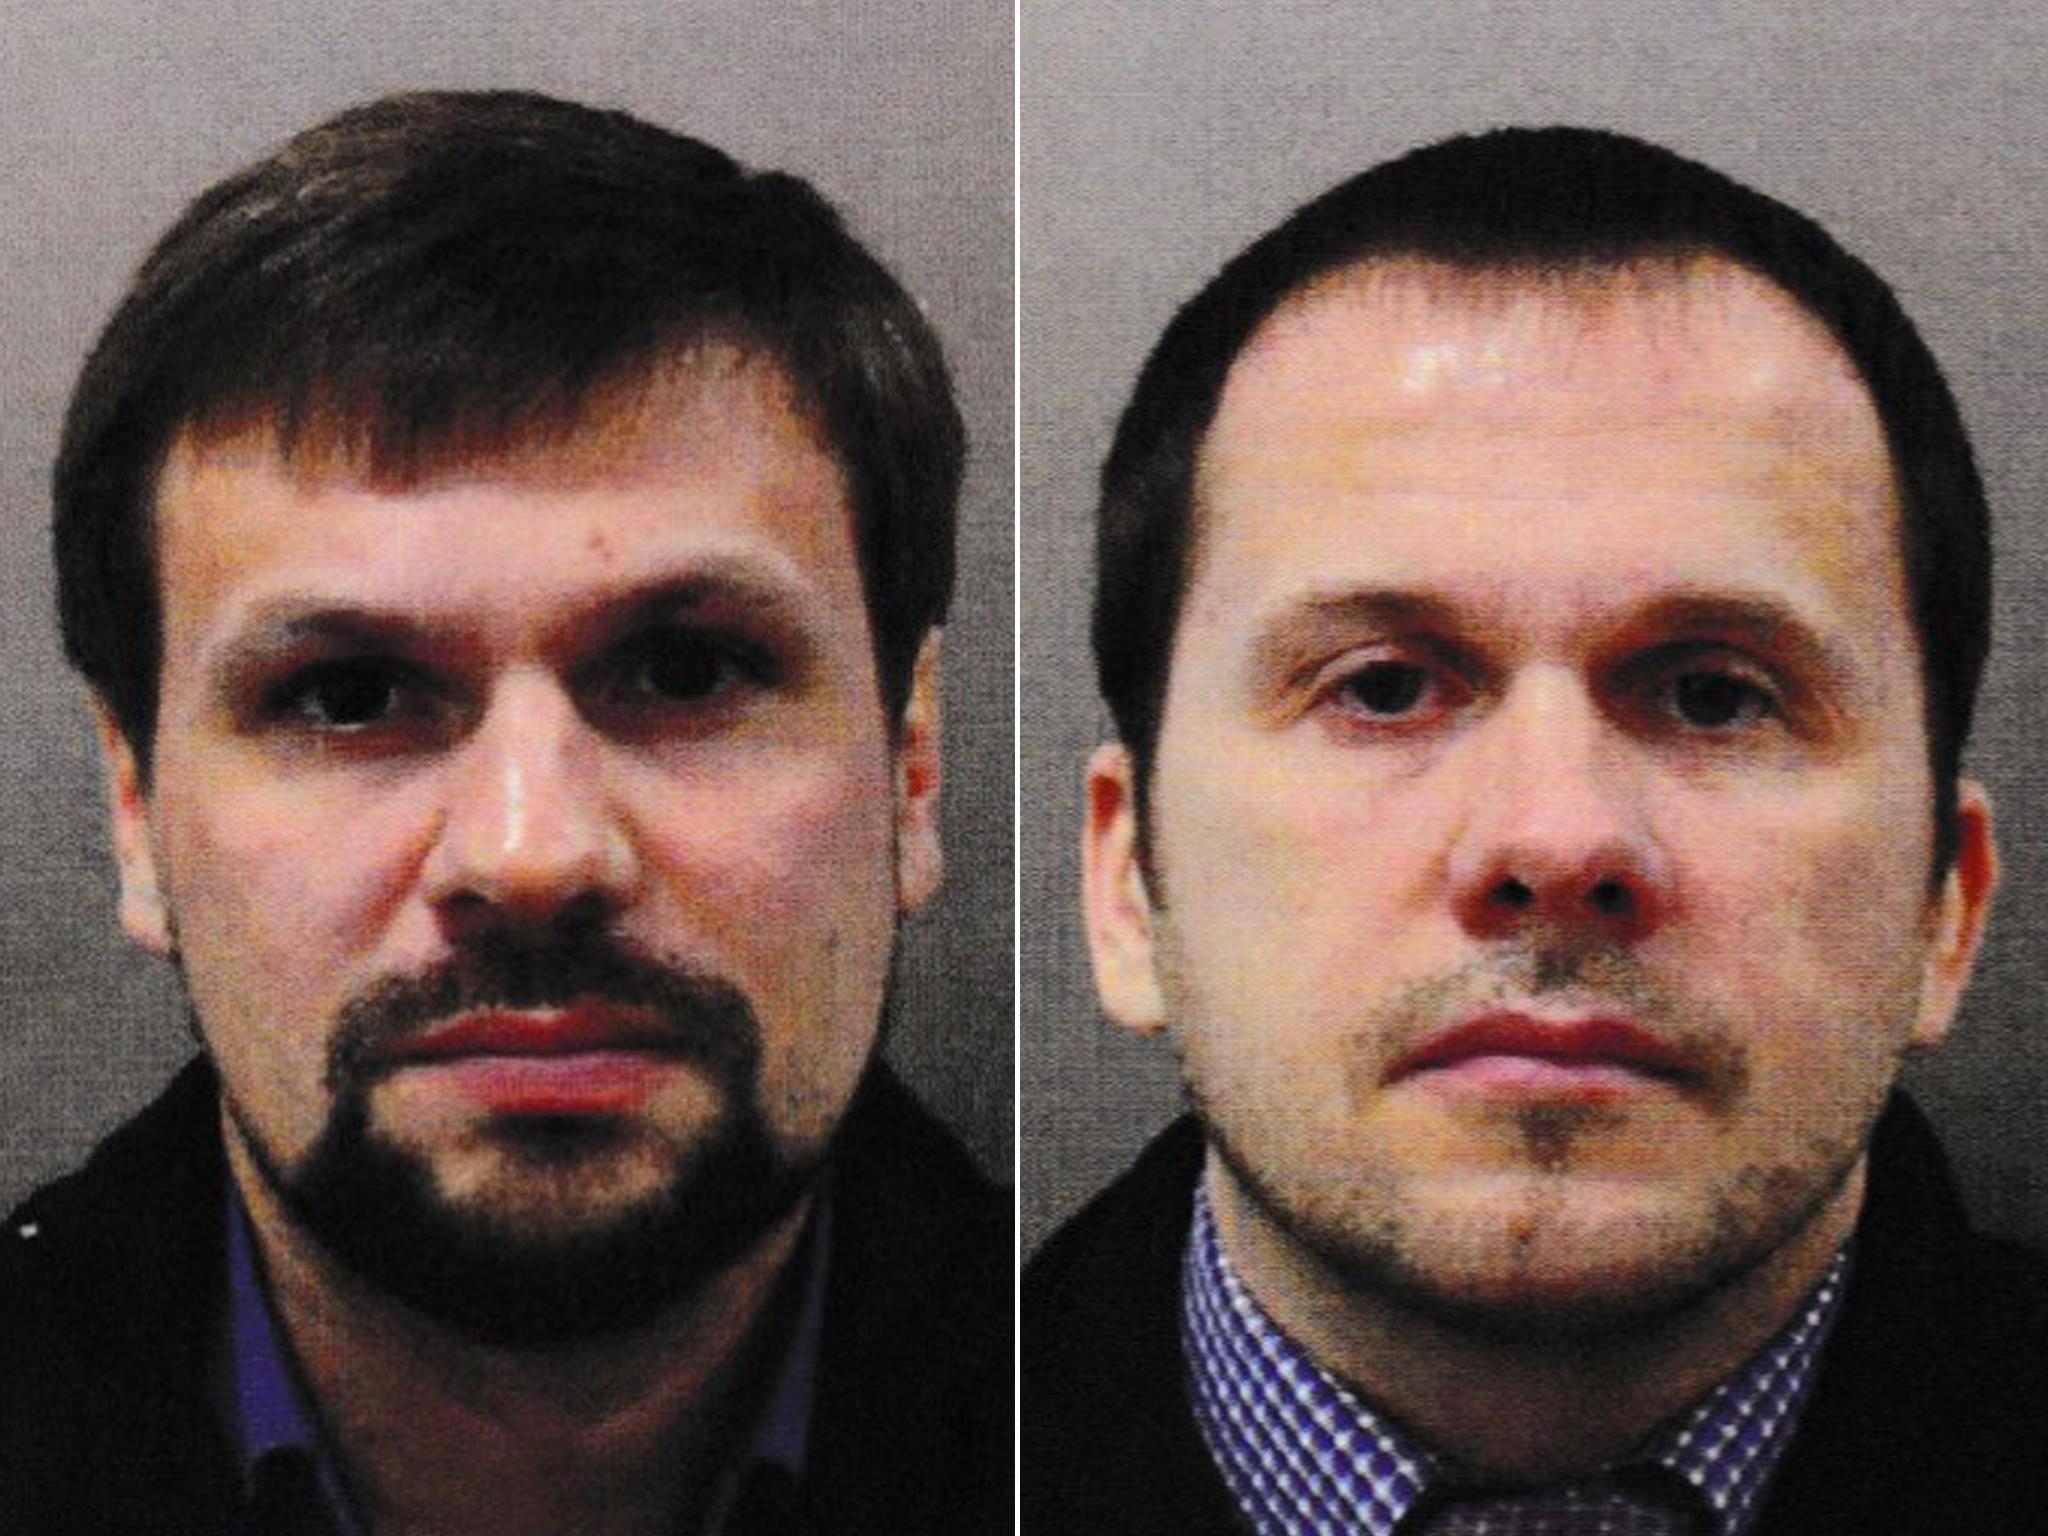 Photos from passports in the names of Ruslan Boshirov (L) and Alexander Petrov (R)